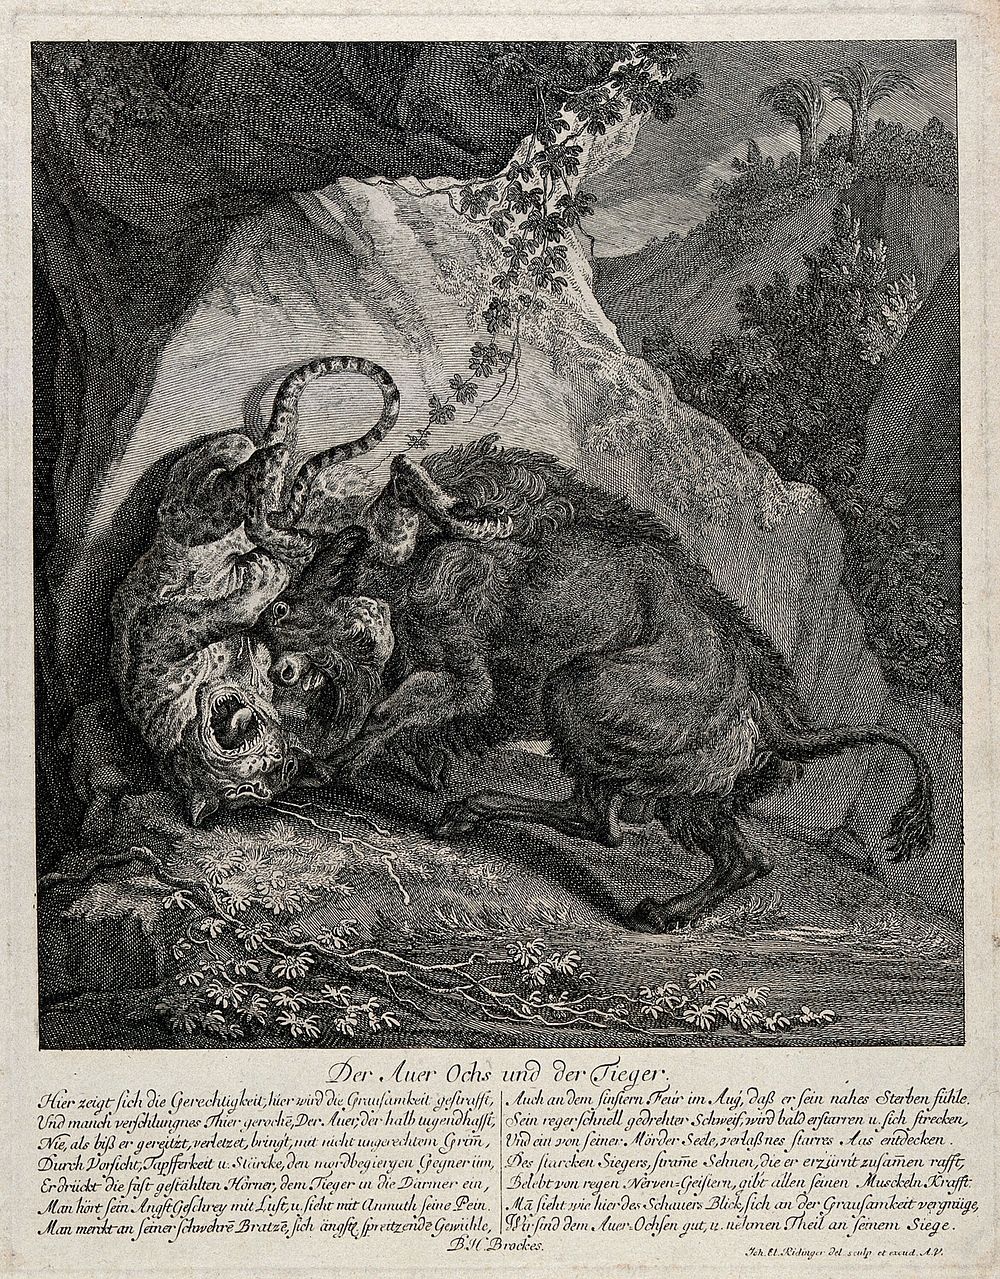 A tiger and an ox fighting outside a cave in the mountains. Etching by J.E. Ridinger.